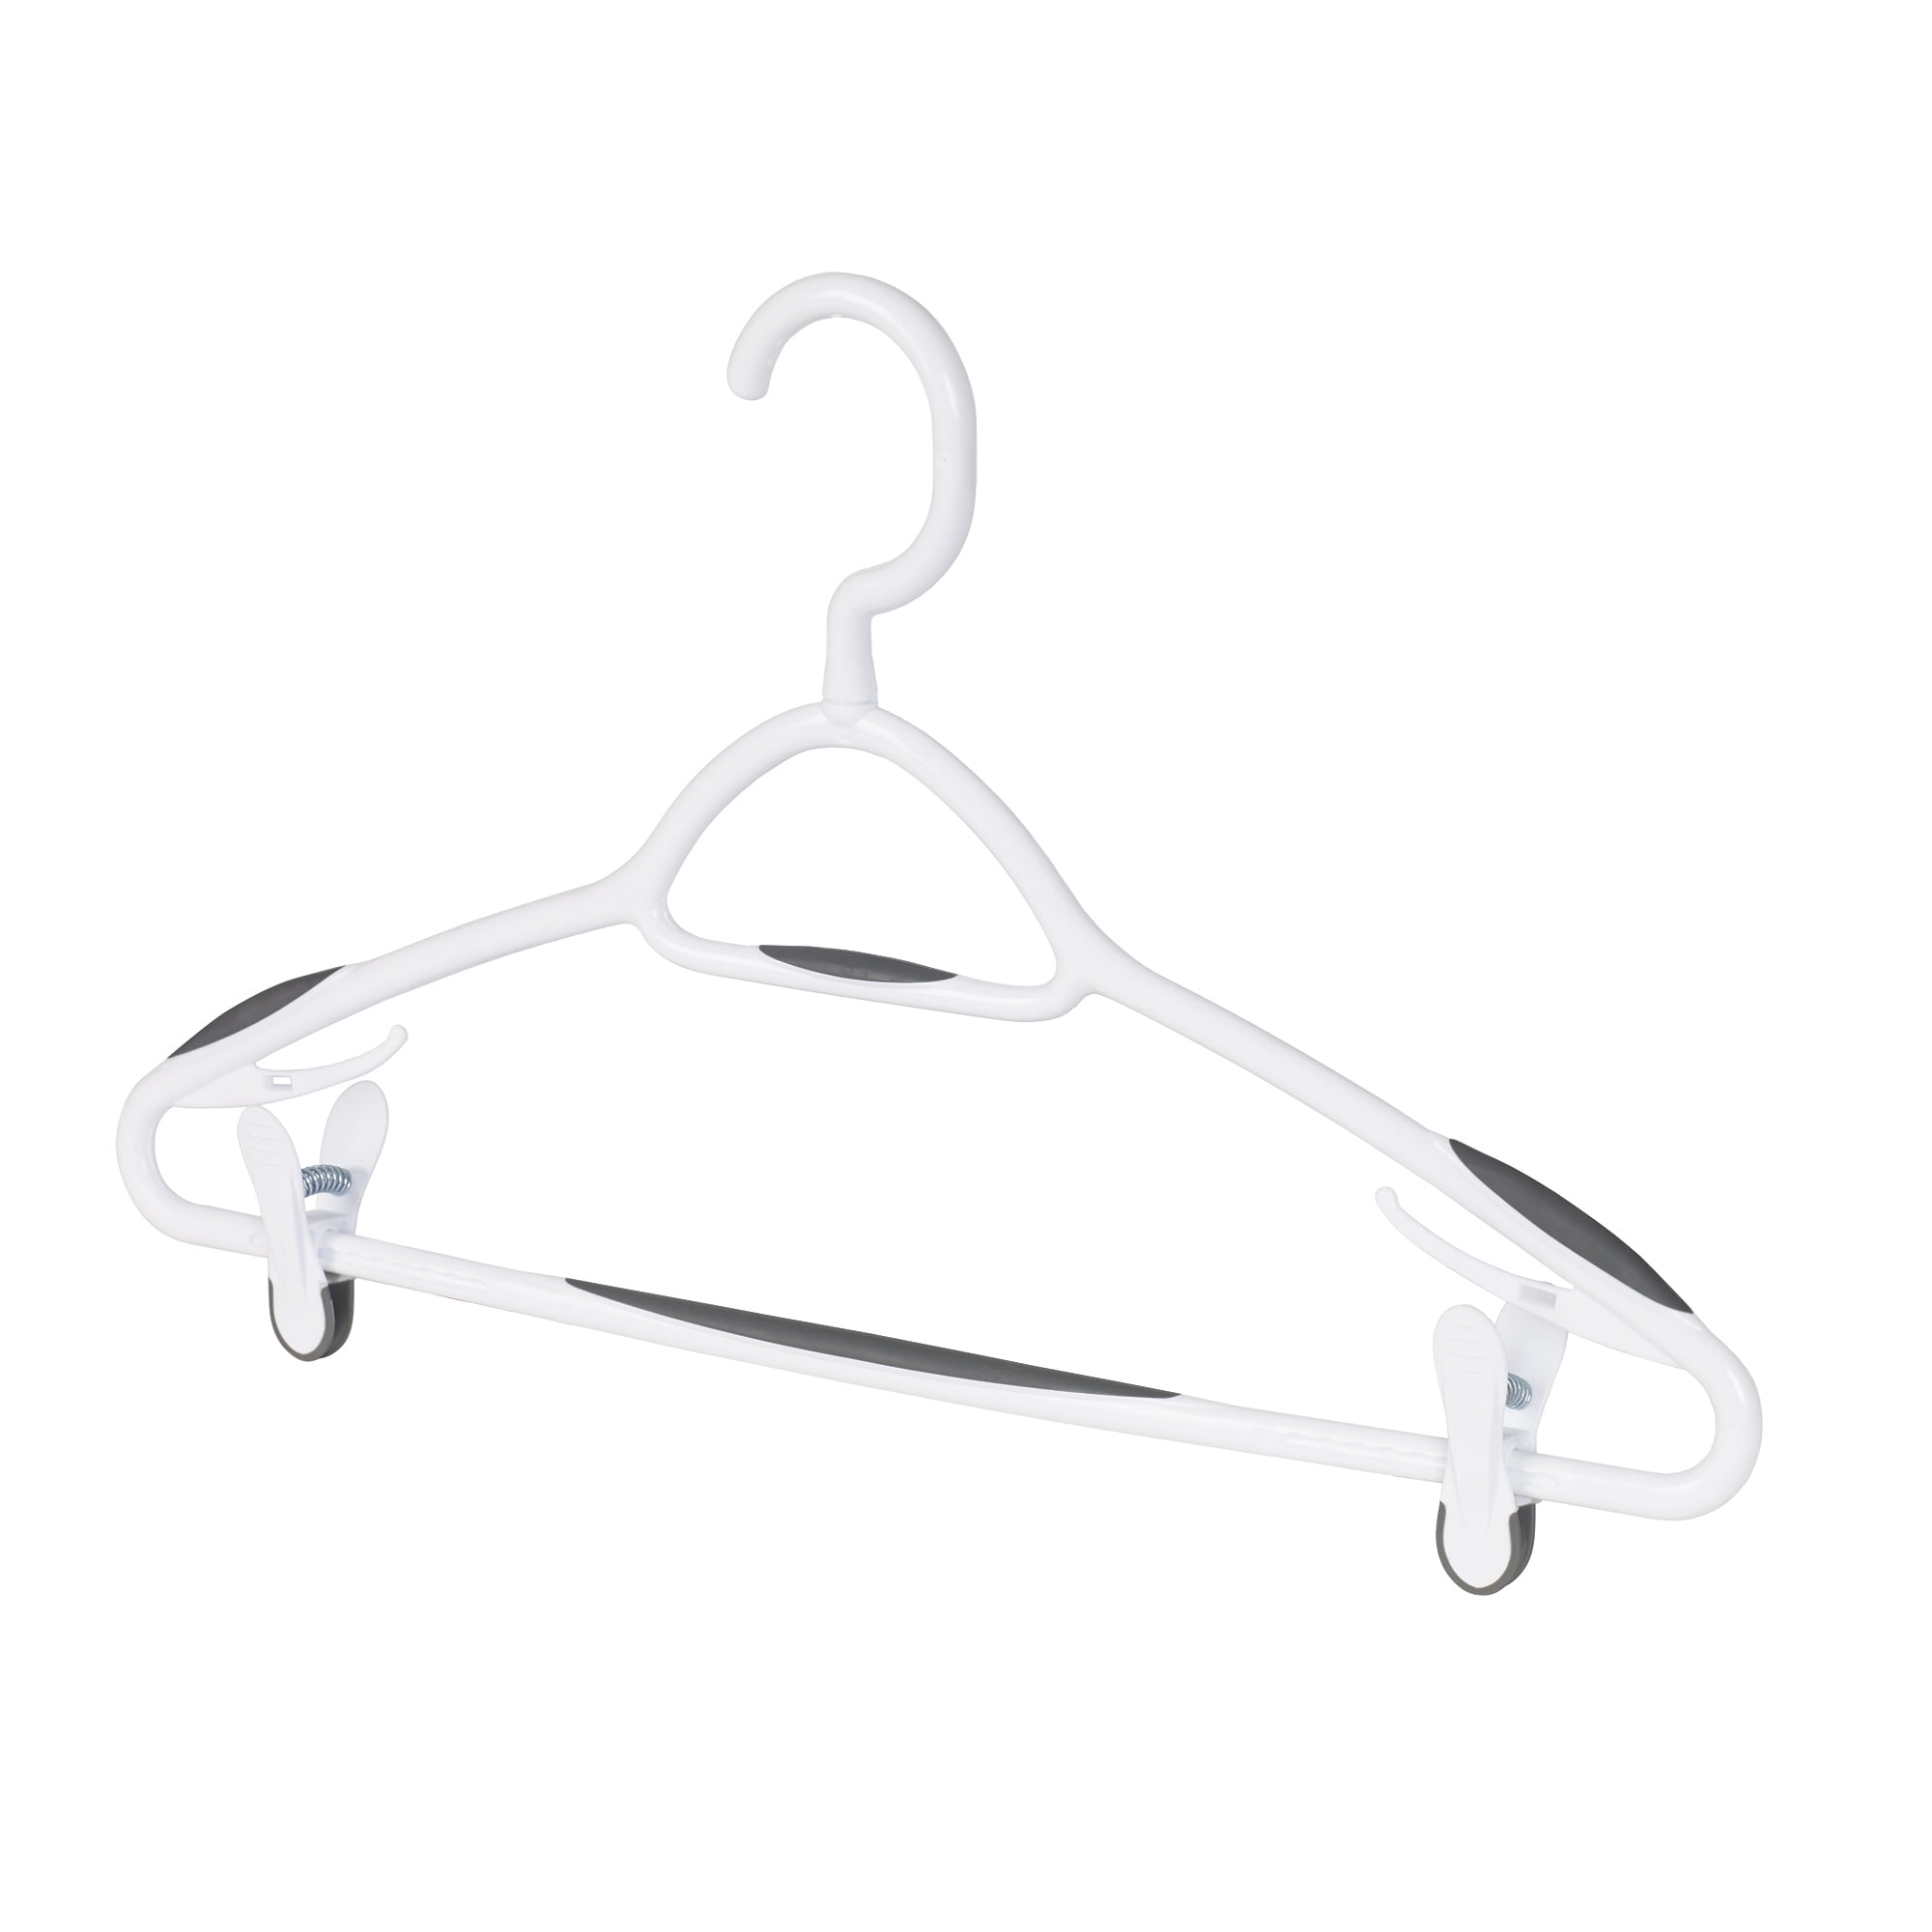 Set of 5 Deluxe Non Slip Hangers by Neatfreak! - Space Saving Hangers for  Clothes, Pants, Jackets and Shirt 5 Pack,White/Grey